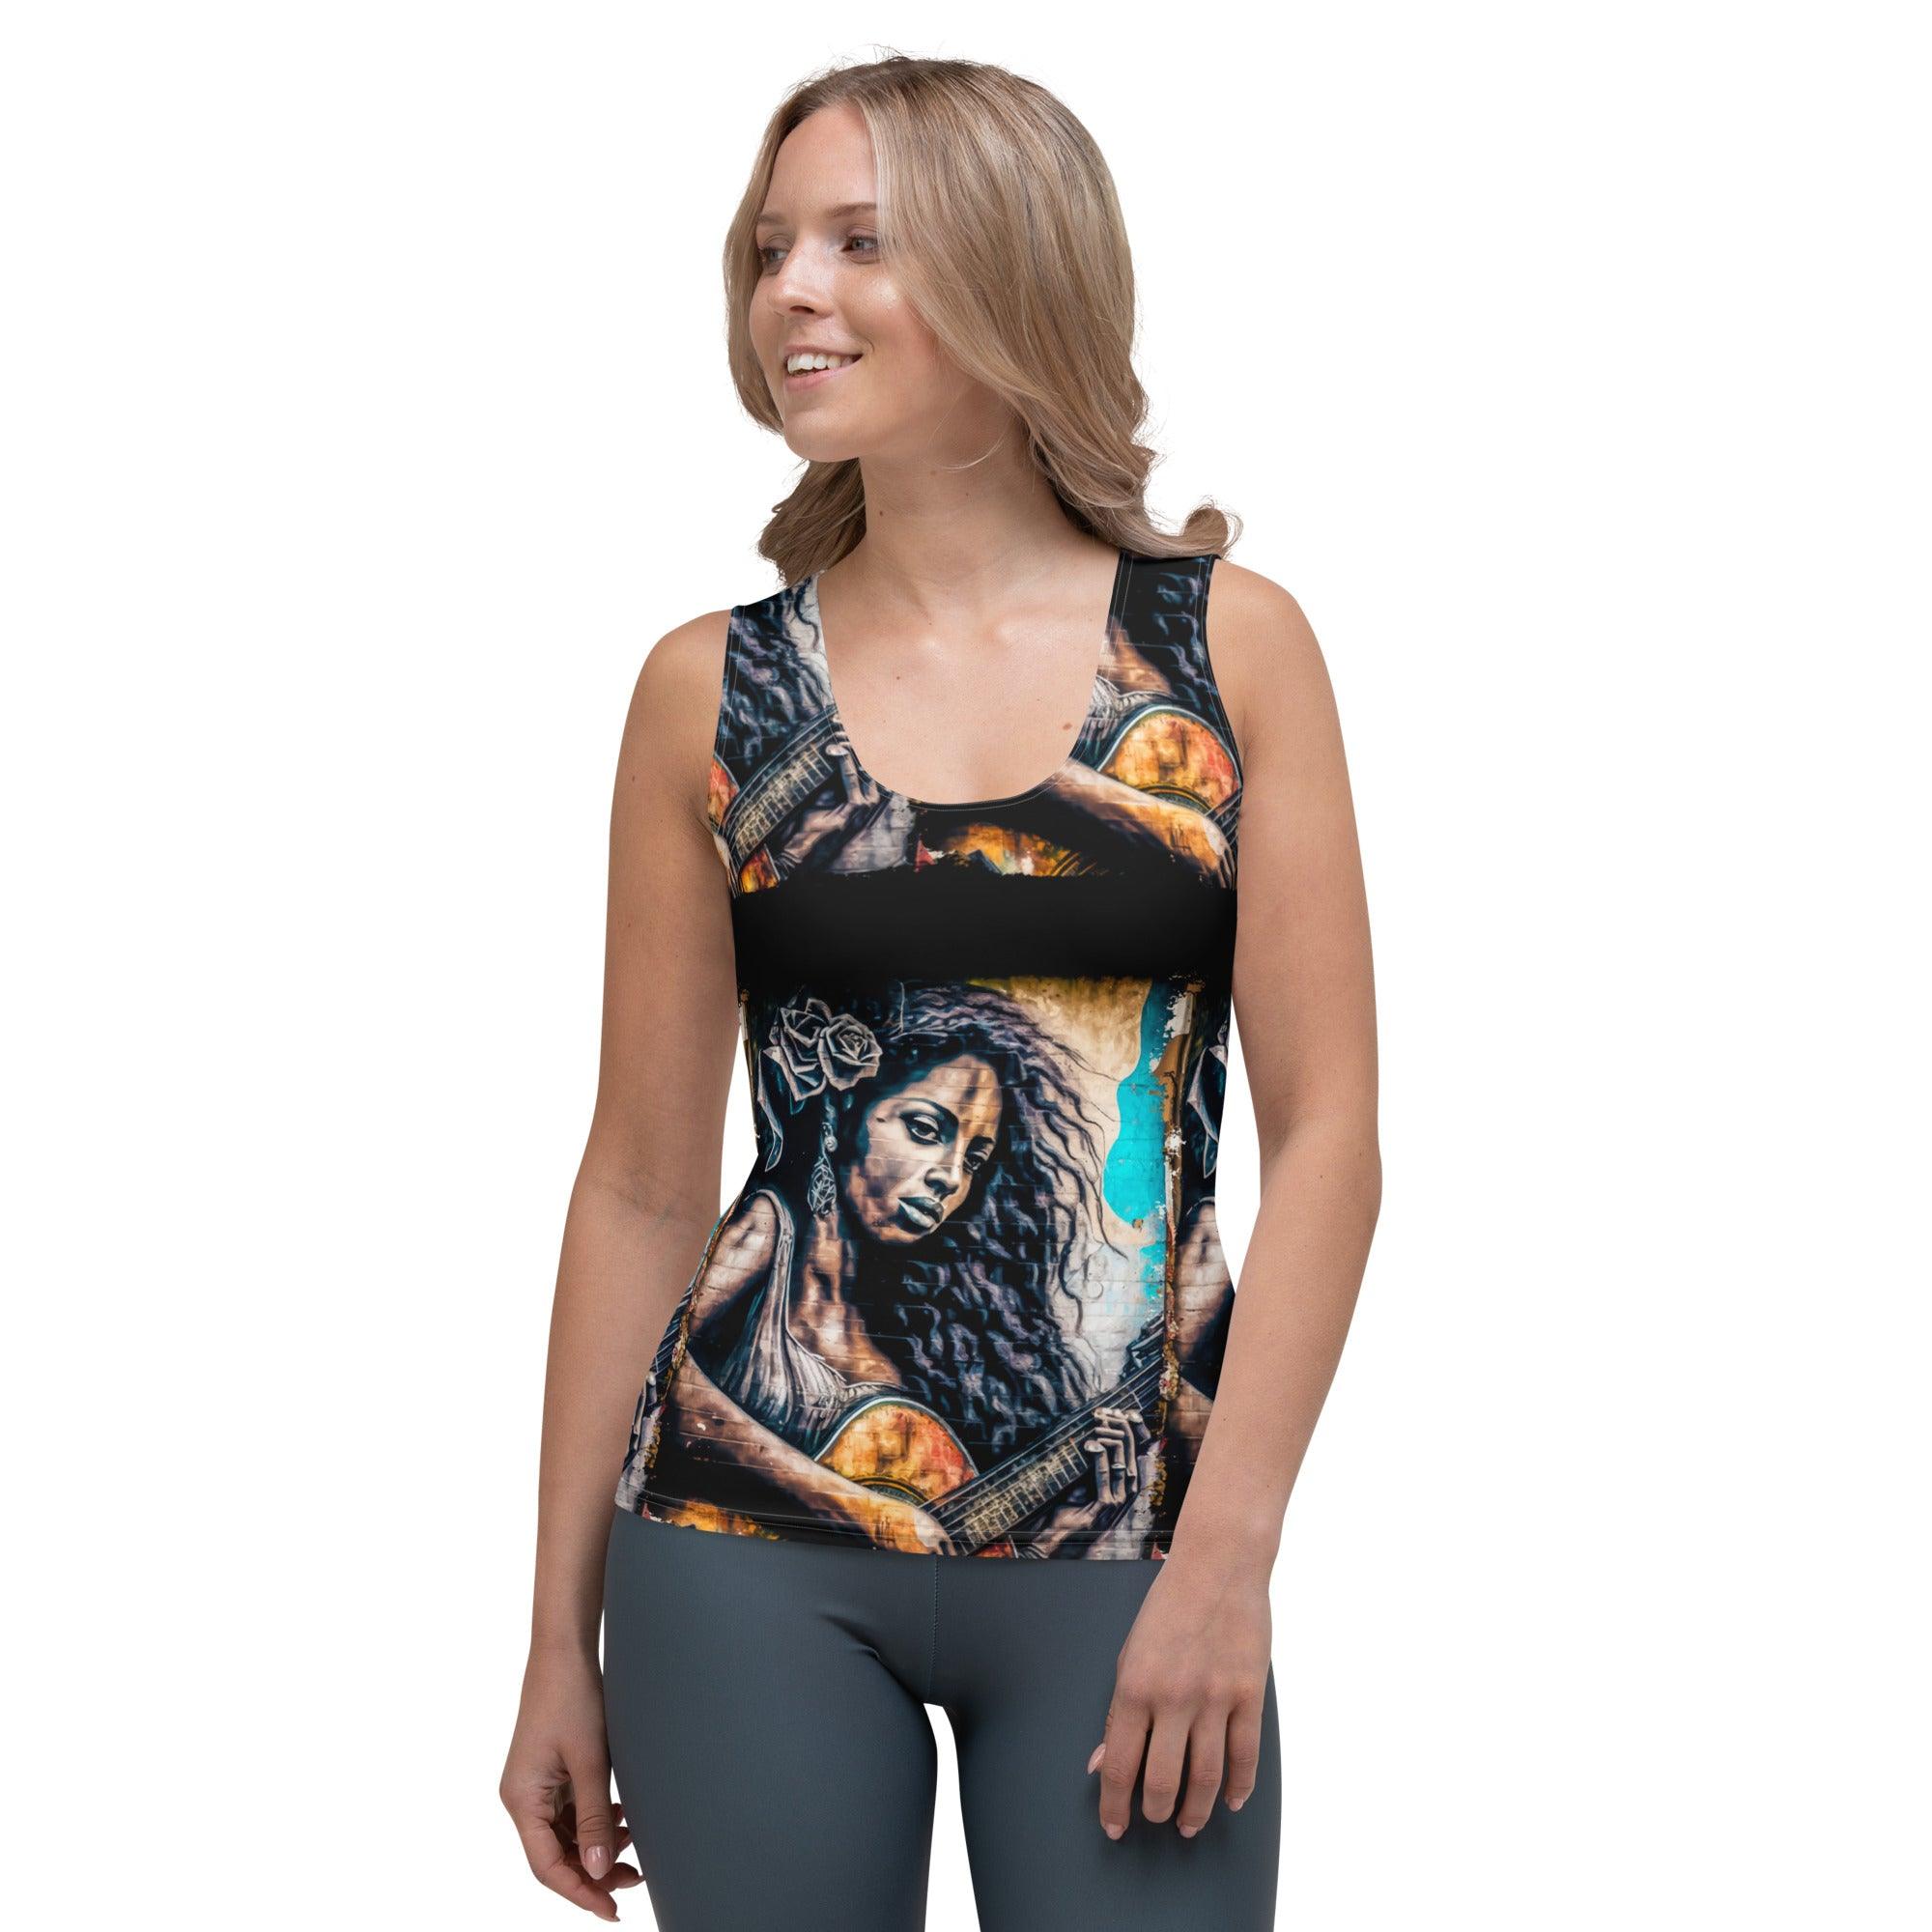 She Plays With Feeling Sublimation Cut & Sew Tank Top - Beyond T-shirts